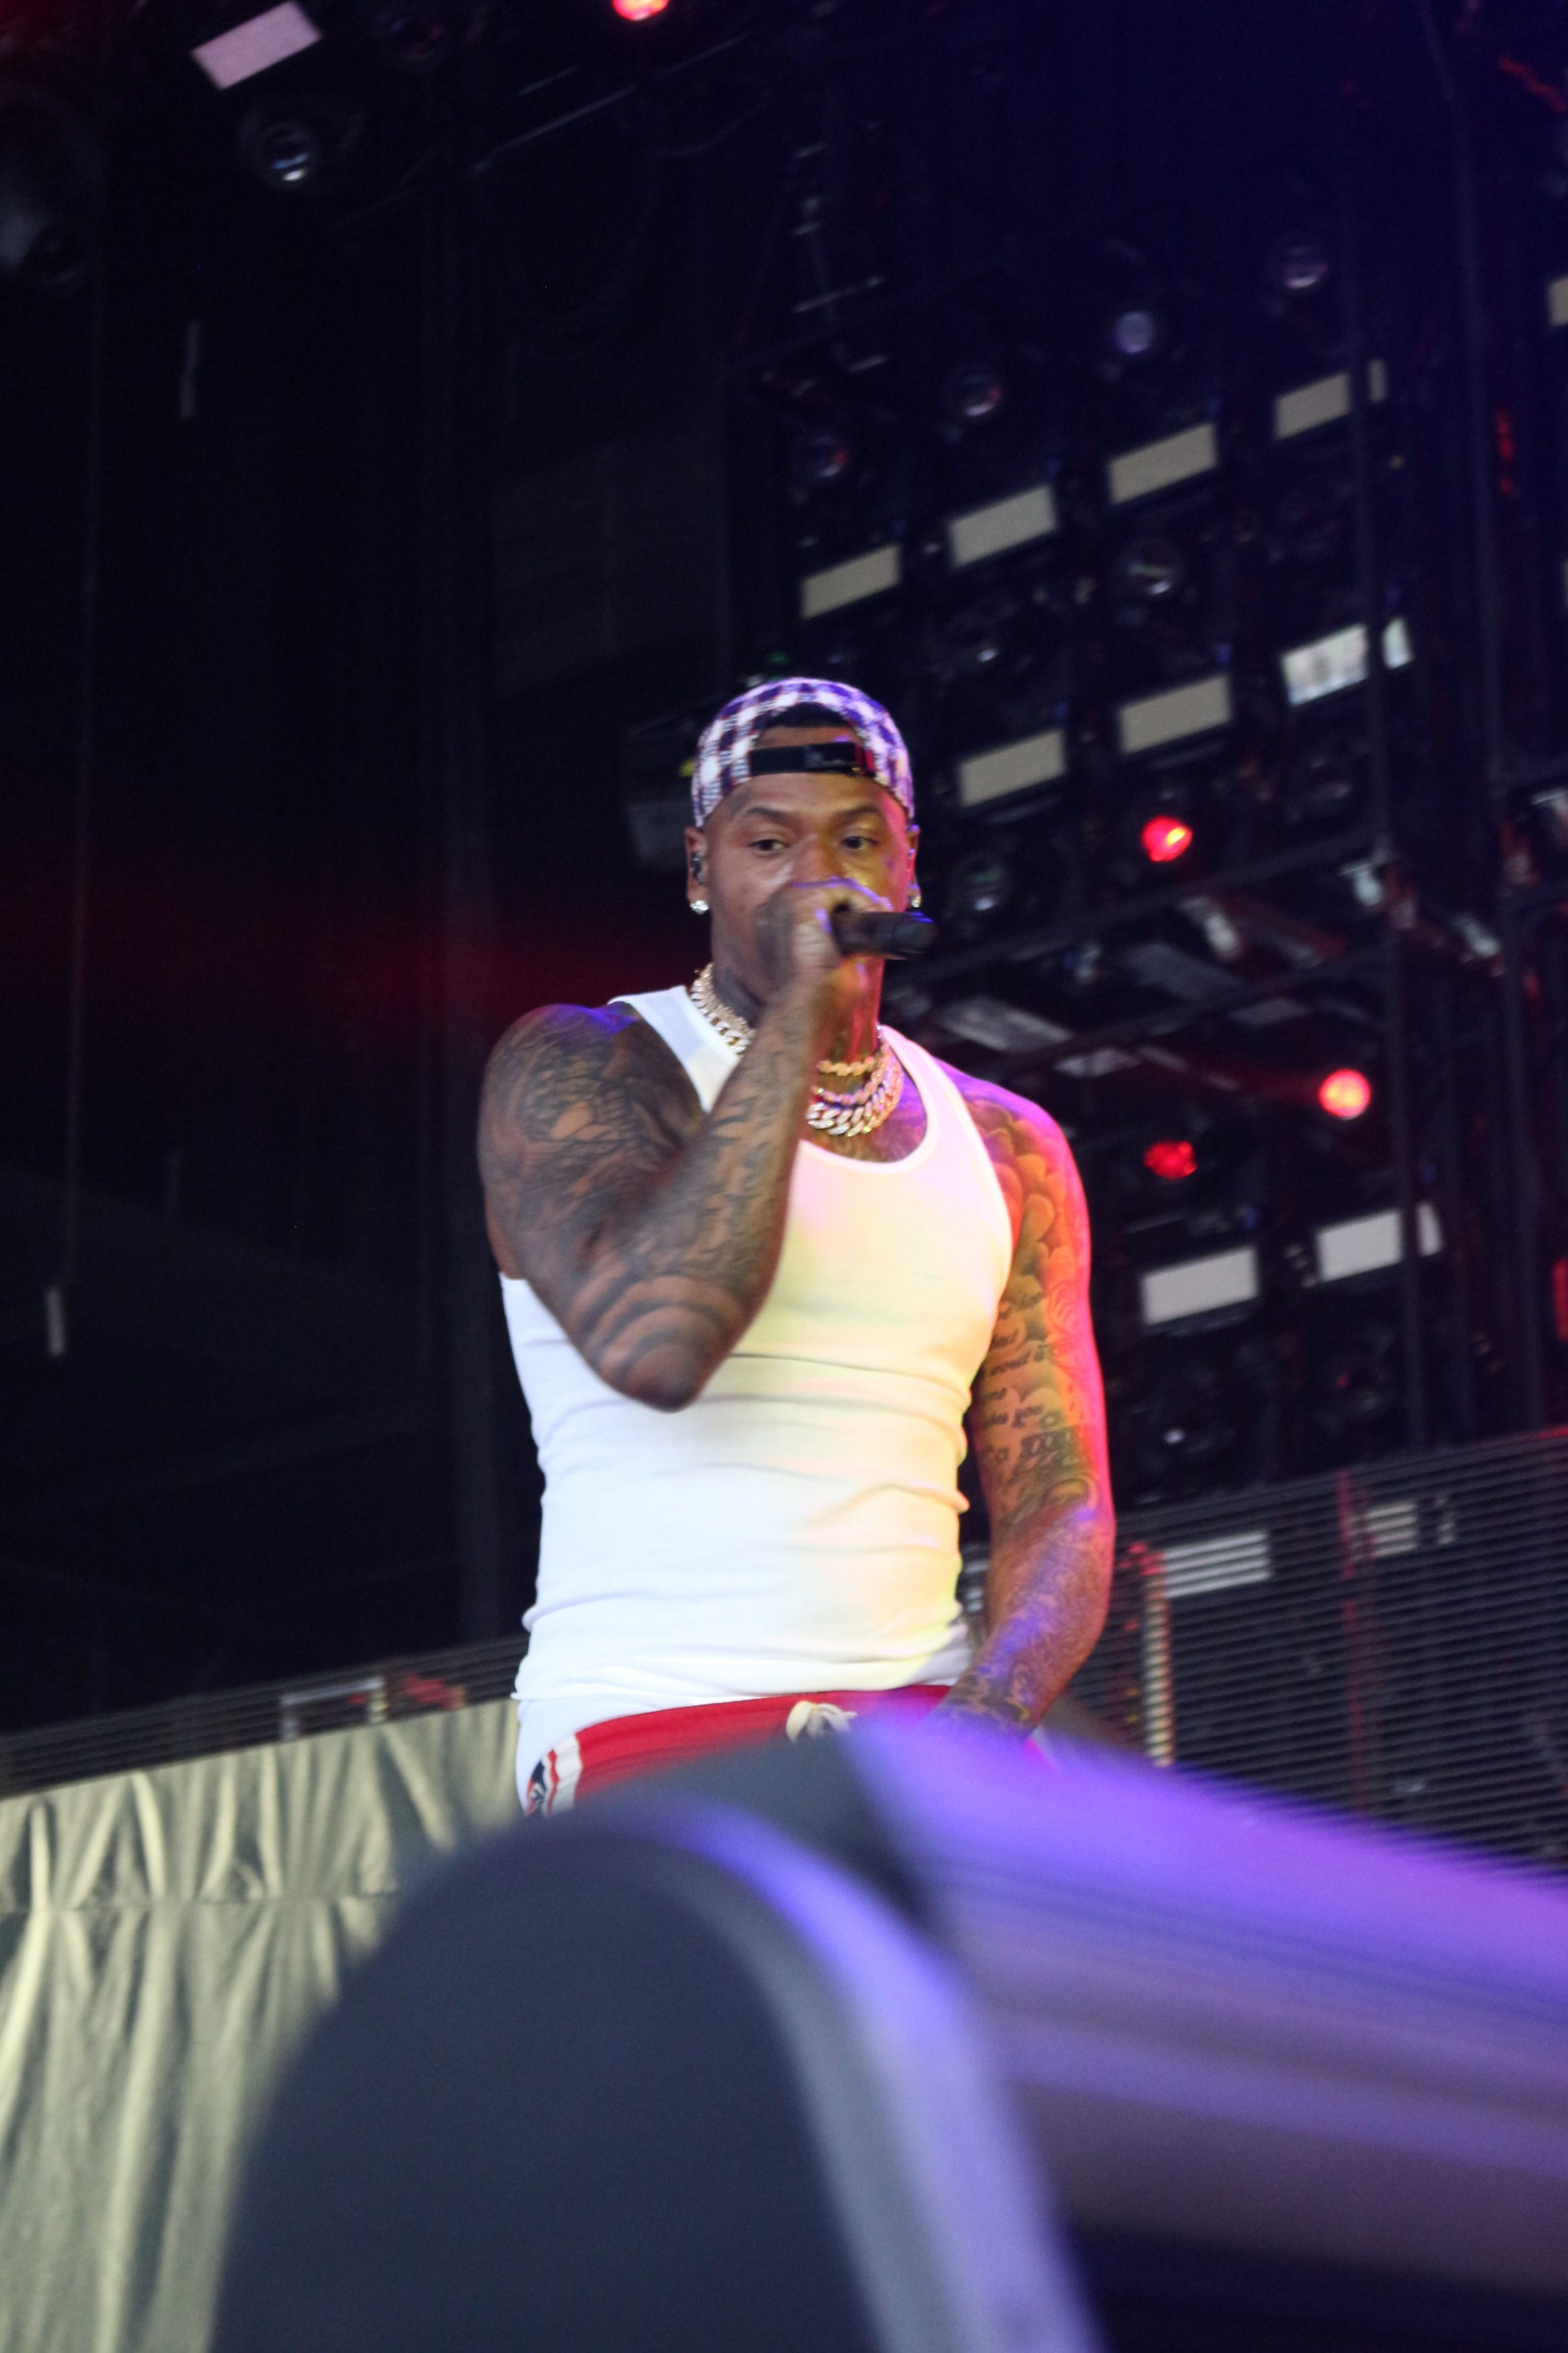 Moneybagg Yo performs at the 2019 Decent Exposure Tour